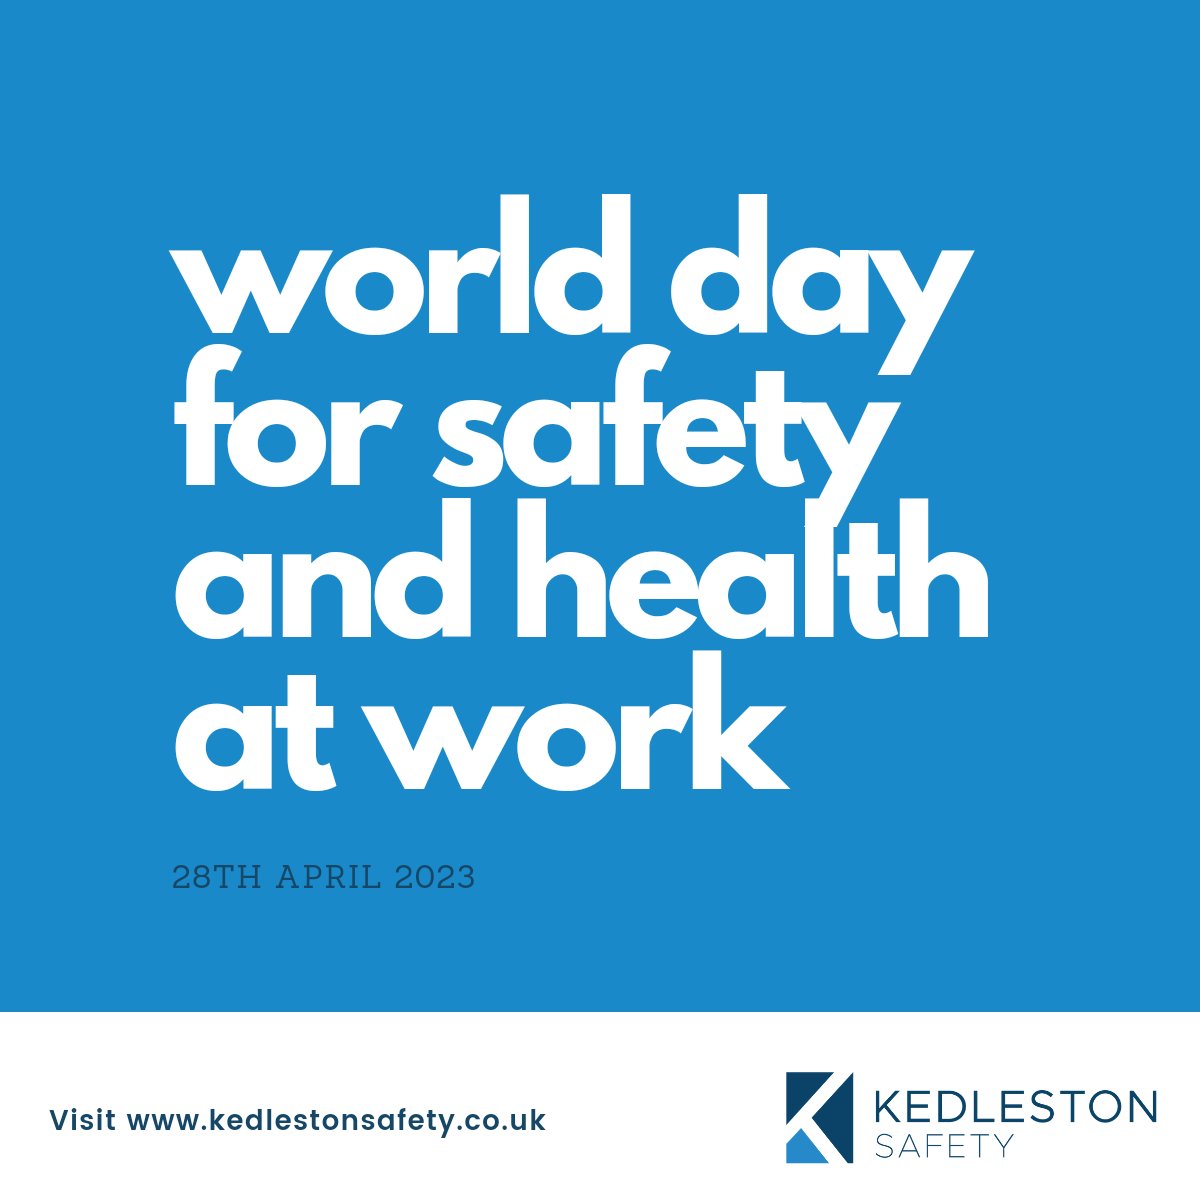 Promoting the fundamental right to a safe and healthy working environment requires creating a culture of safety in the workplace. Implement safety policies, provide training and PPE, encourage the reporting of safety concerns #SafeAndHealthyWork #SafeDay2023